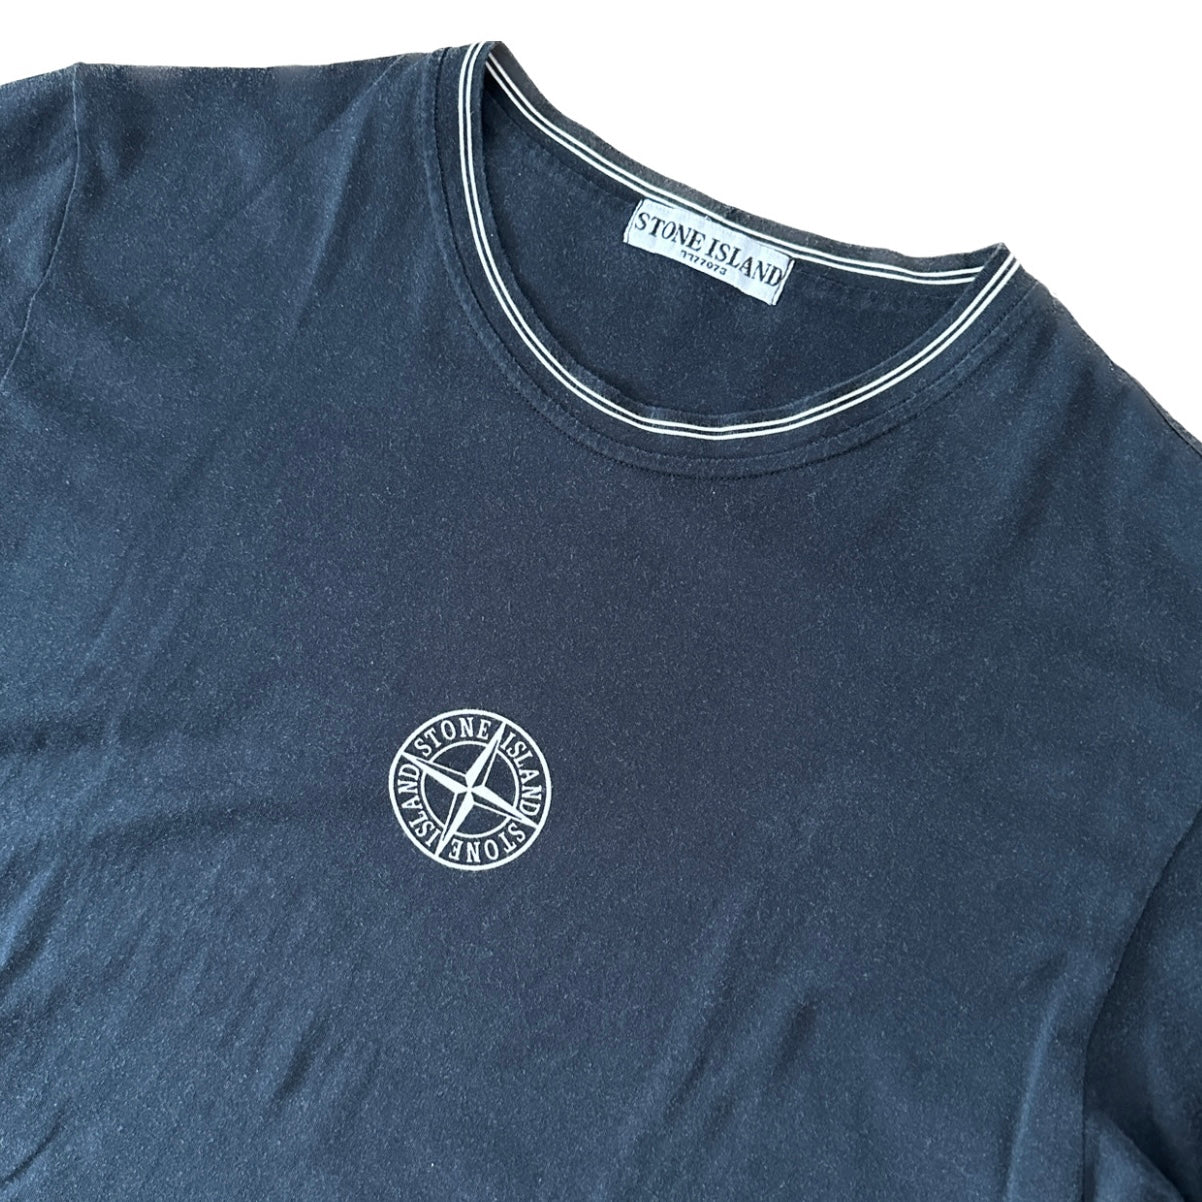 Stone Island 2008 T-Shirt - XL - Made in Italy